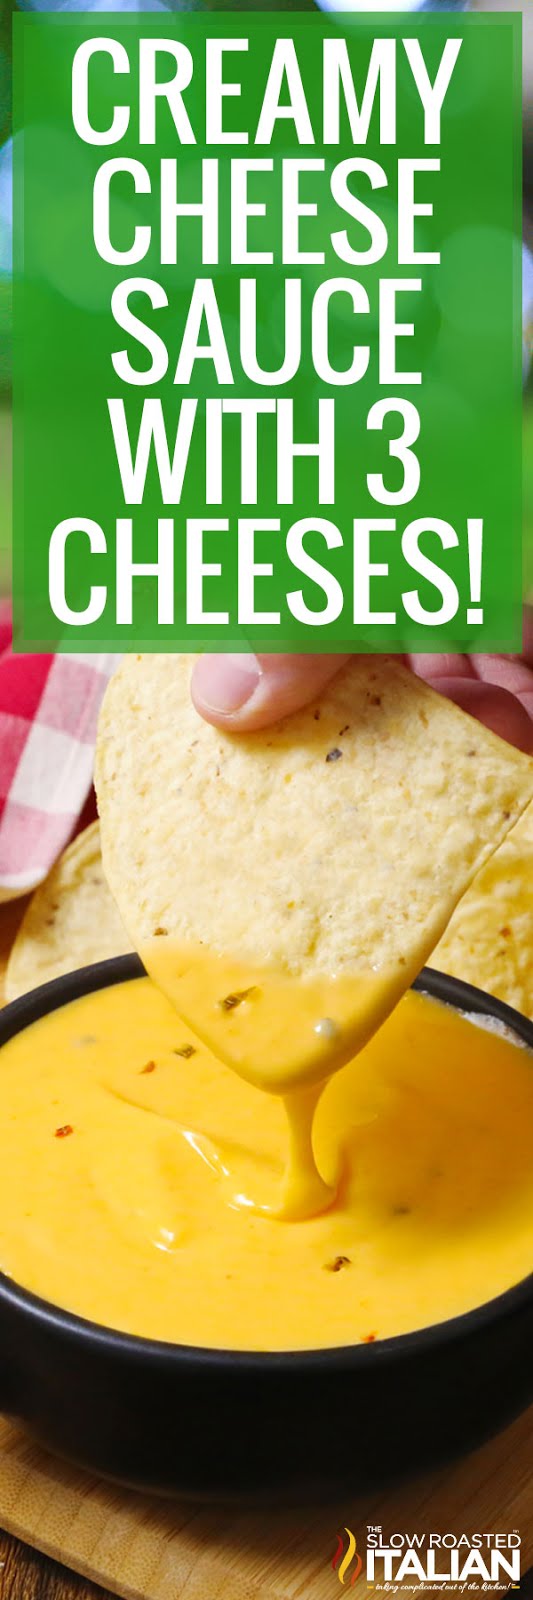 Creamy Cheese Sauce Recipe with 3 Cheeses